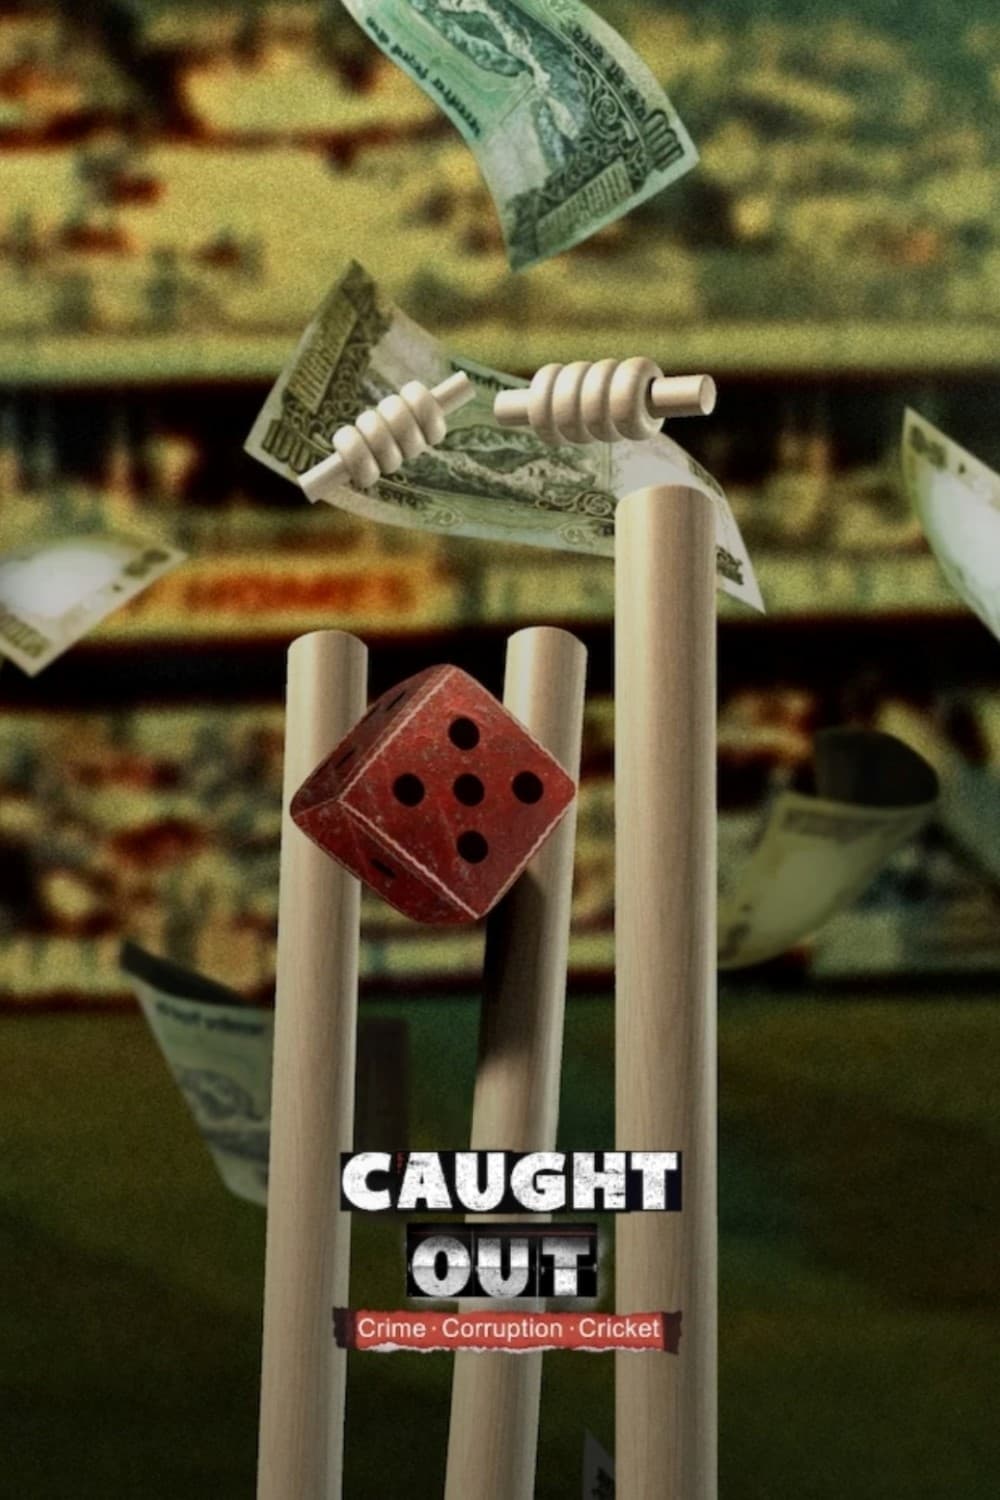 Caught Out: Tội ác. Tham nhũng. Cricket. - Caught Out: Crime. Corruption. Cricket.